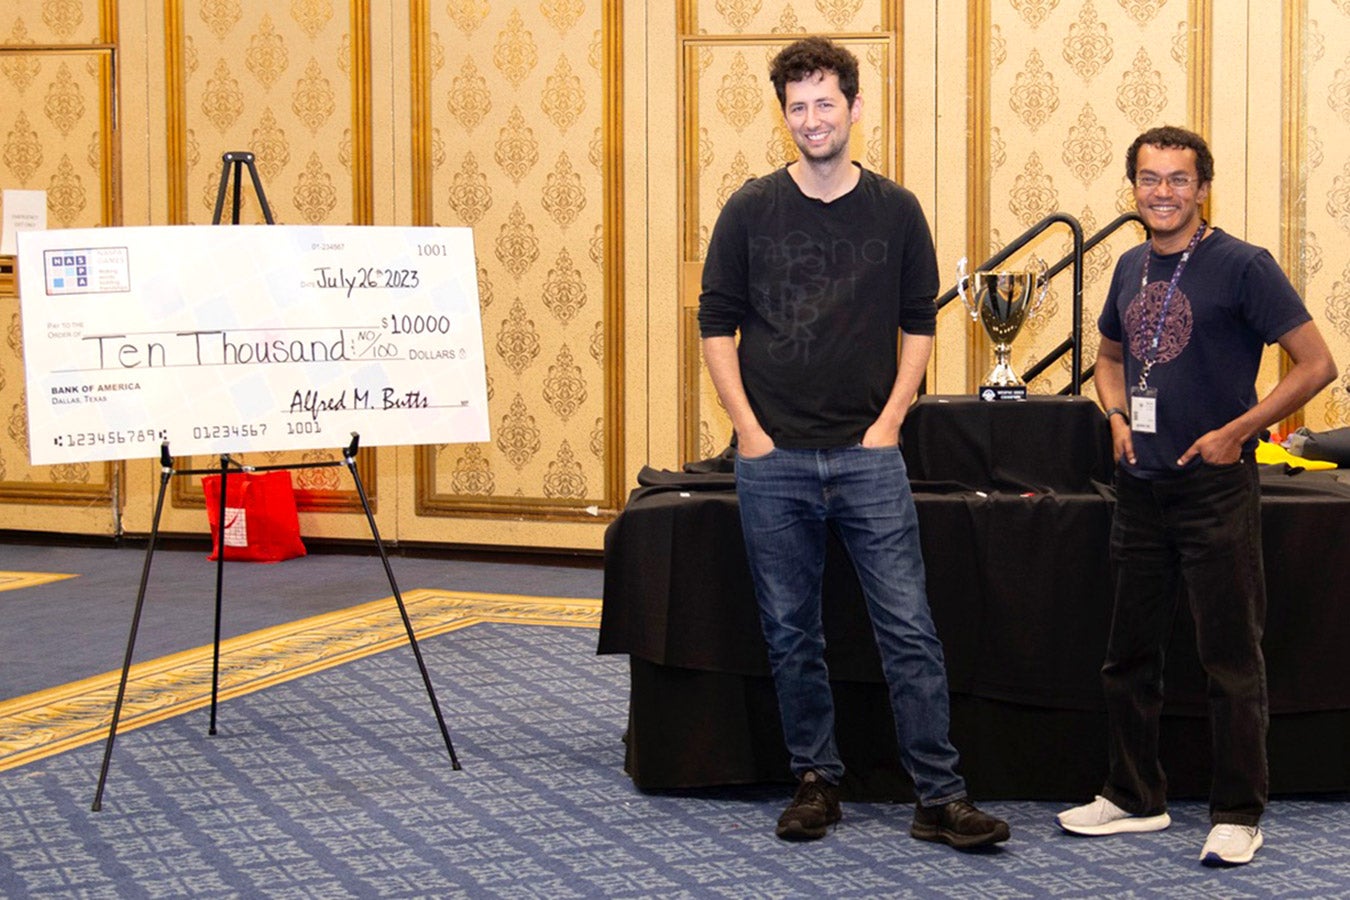 Both finalists stand looking relaxed with hands in pockets near a novelty-size $10,000 check on display on an easel. 